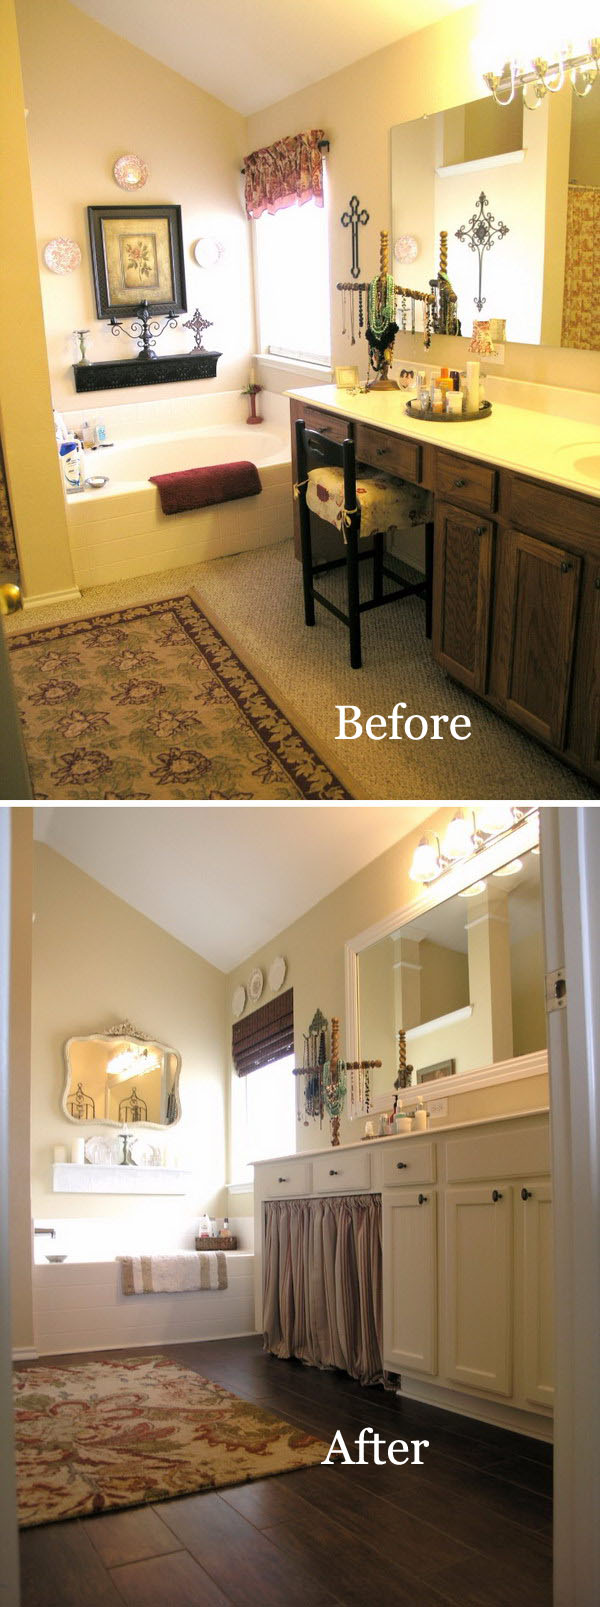 From Dark and Dirty to Bright and Clean Master Bathroom Transformation. 